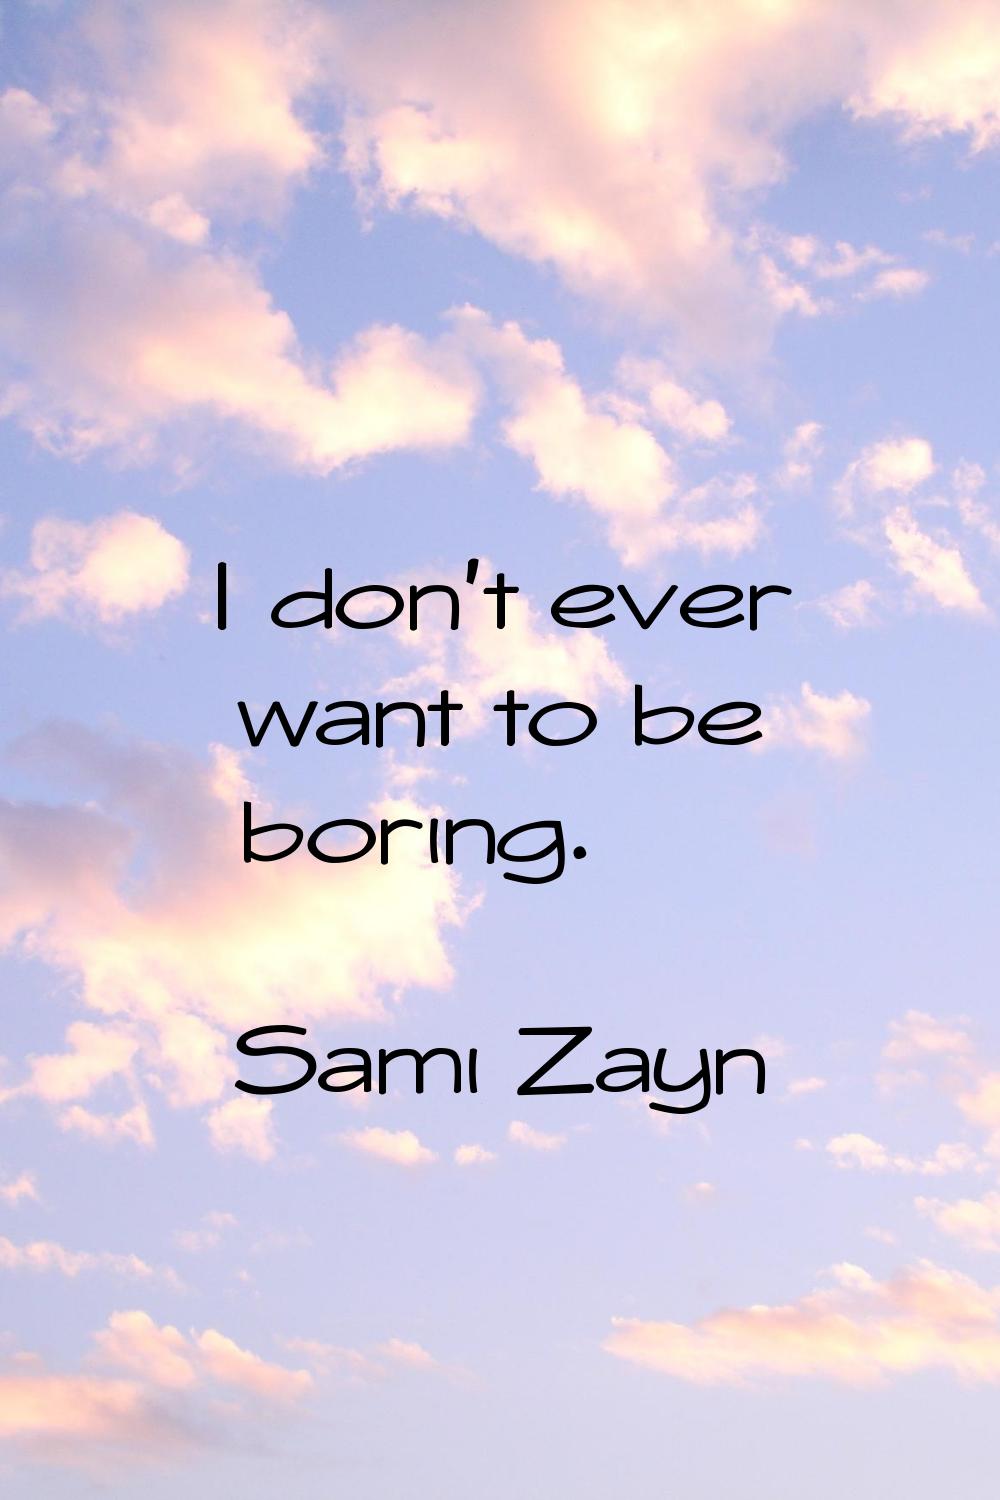 I don't ever want to be boring.